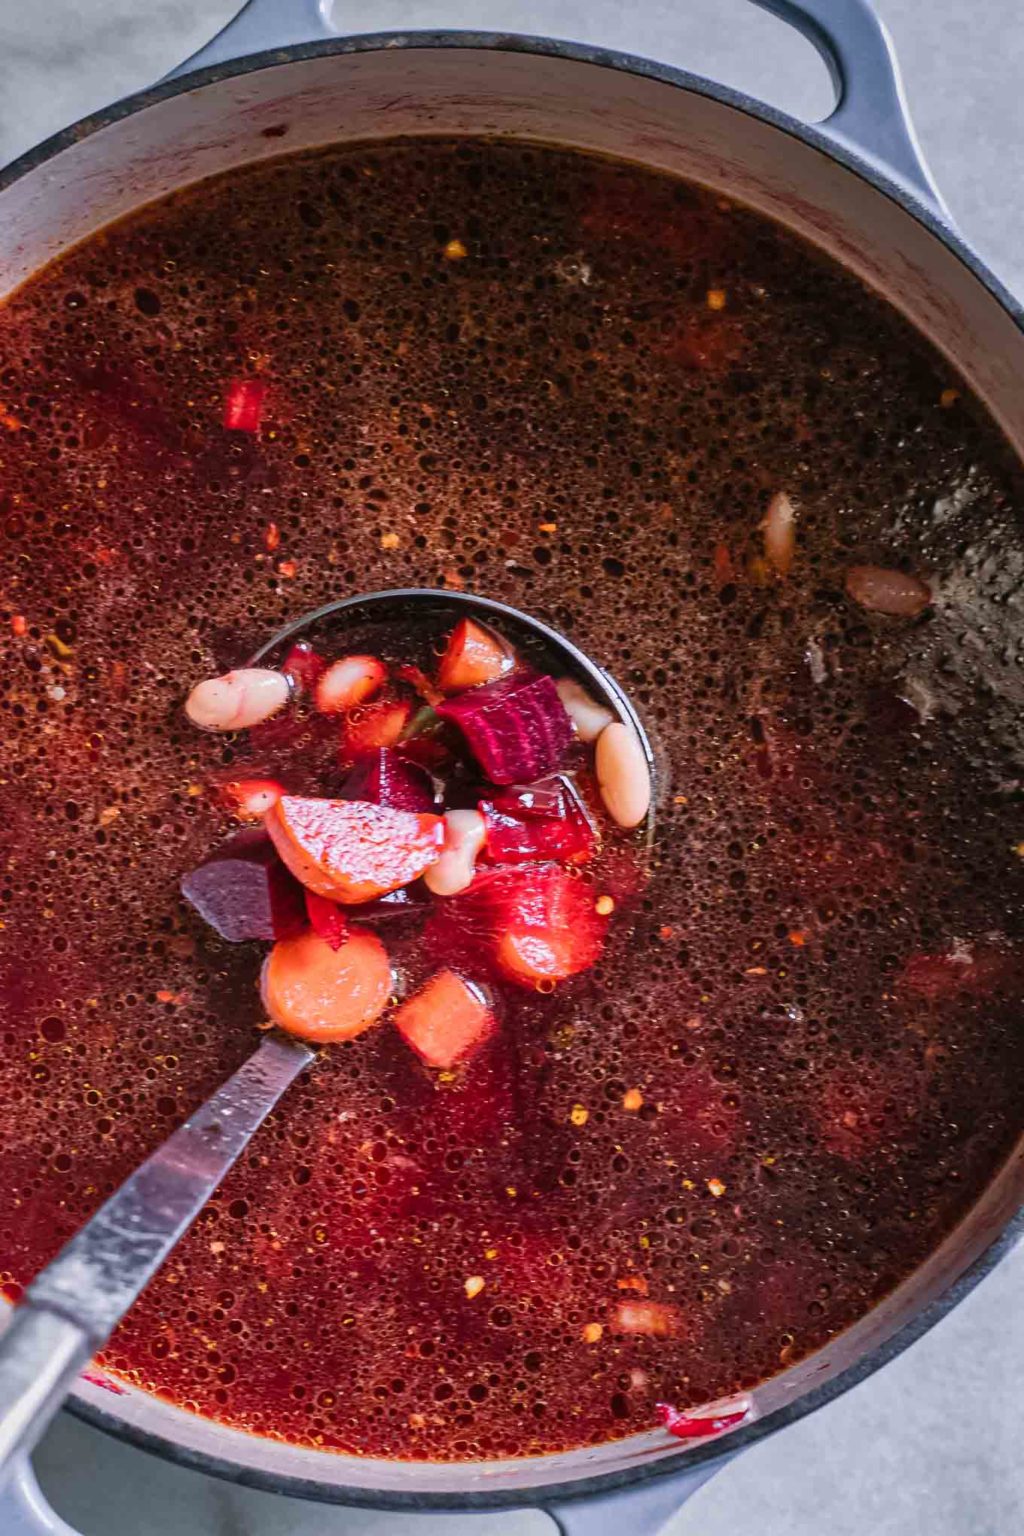 Beet Greens Vegetable Soup ⋆ Use Beets from Root-to-Stem in Soup!